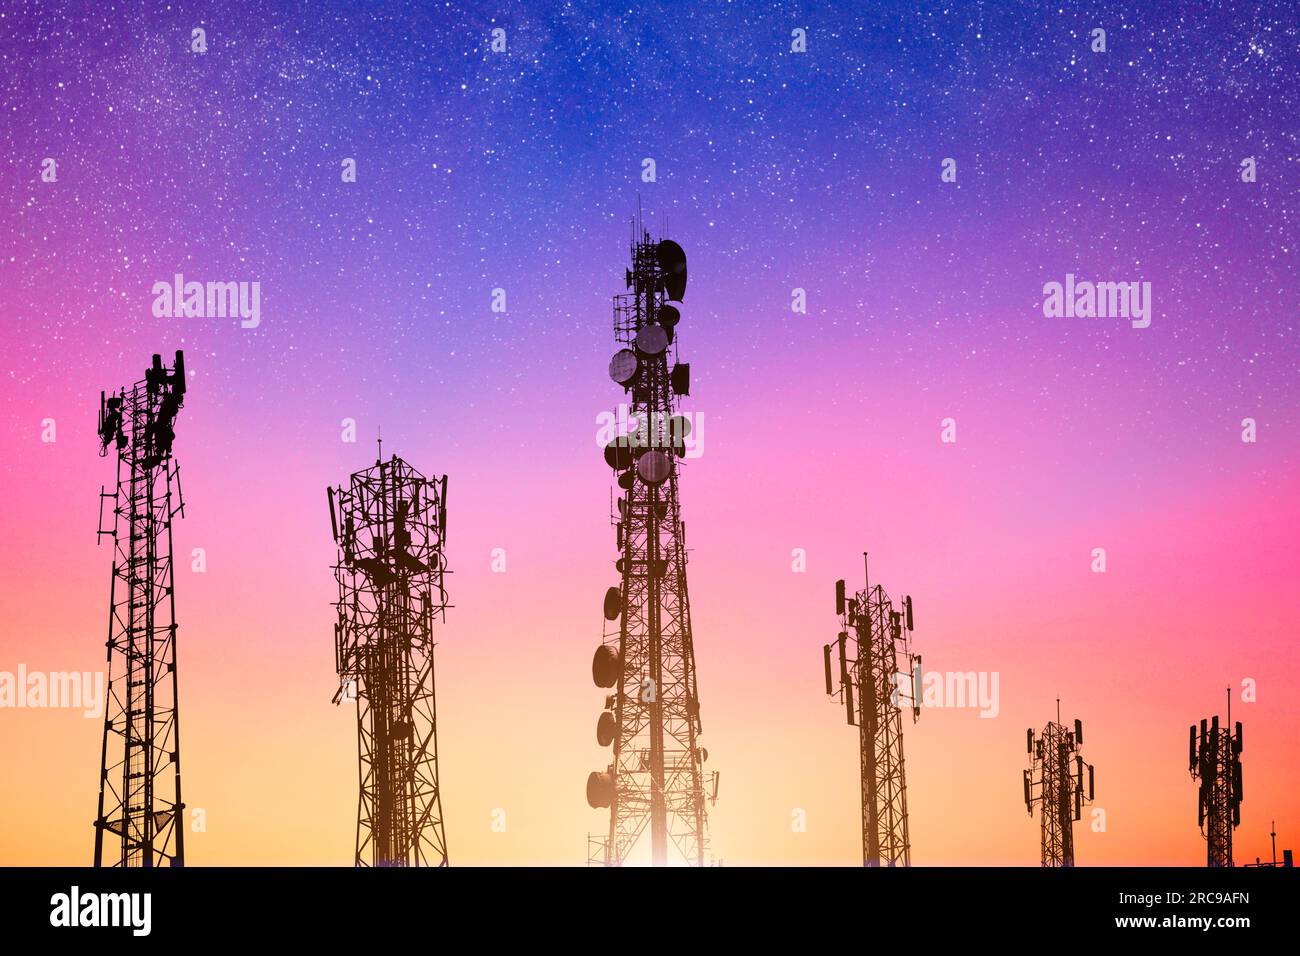 Communication towers on dusk sky, powering 4G and 5G networks. variety network cell site silhouette against vibrant morning sky. Stock Photo